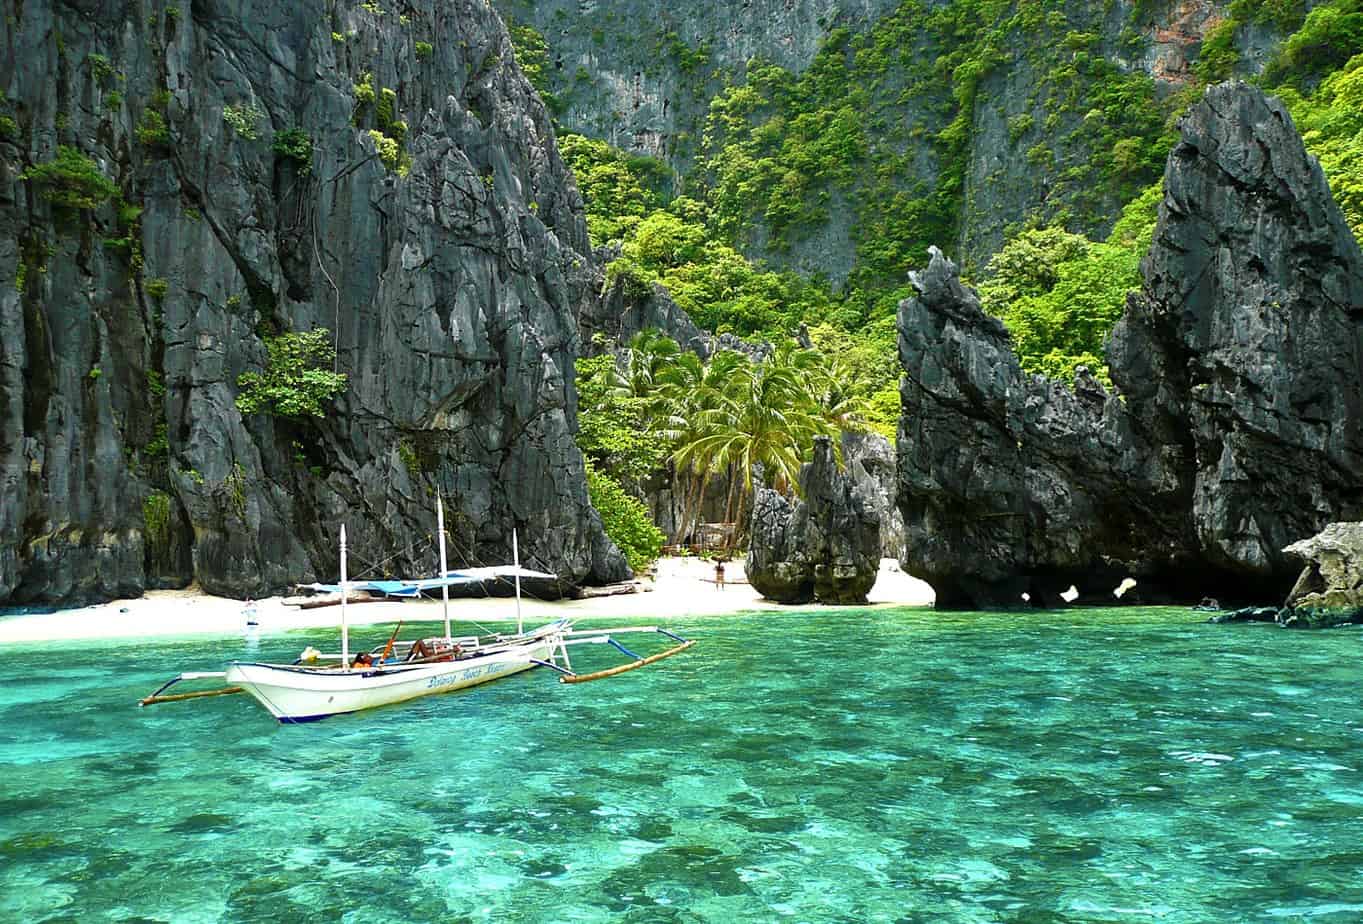 A boat floats on bright blue waters surrounded by tall rocky cliffs.